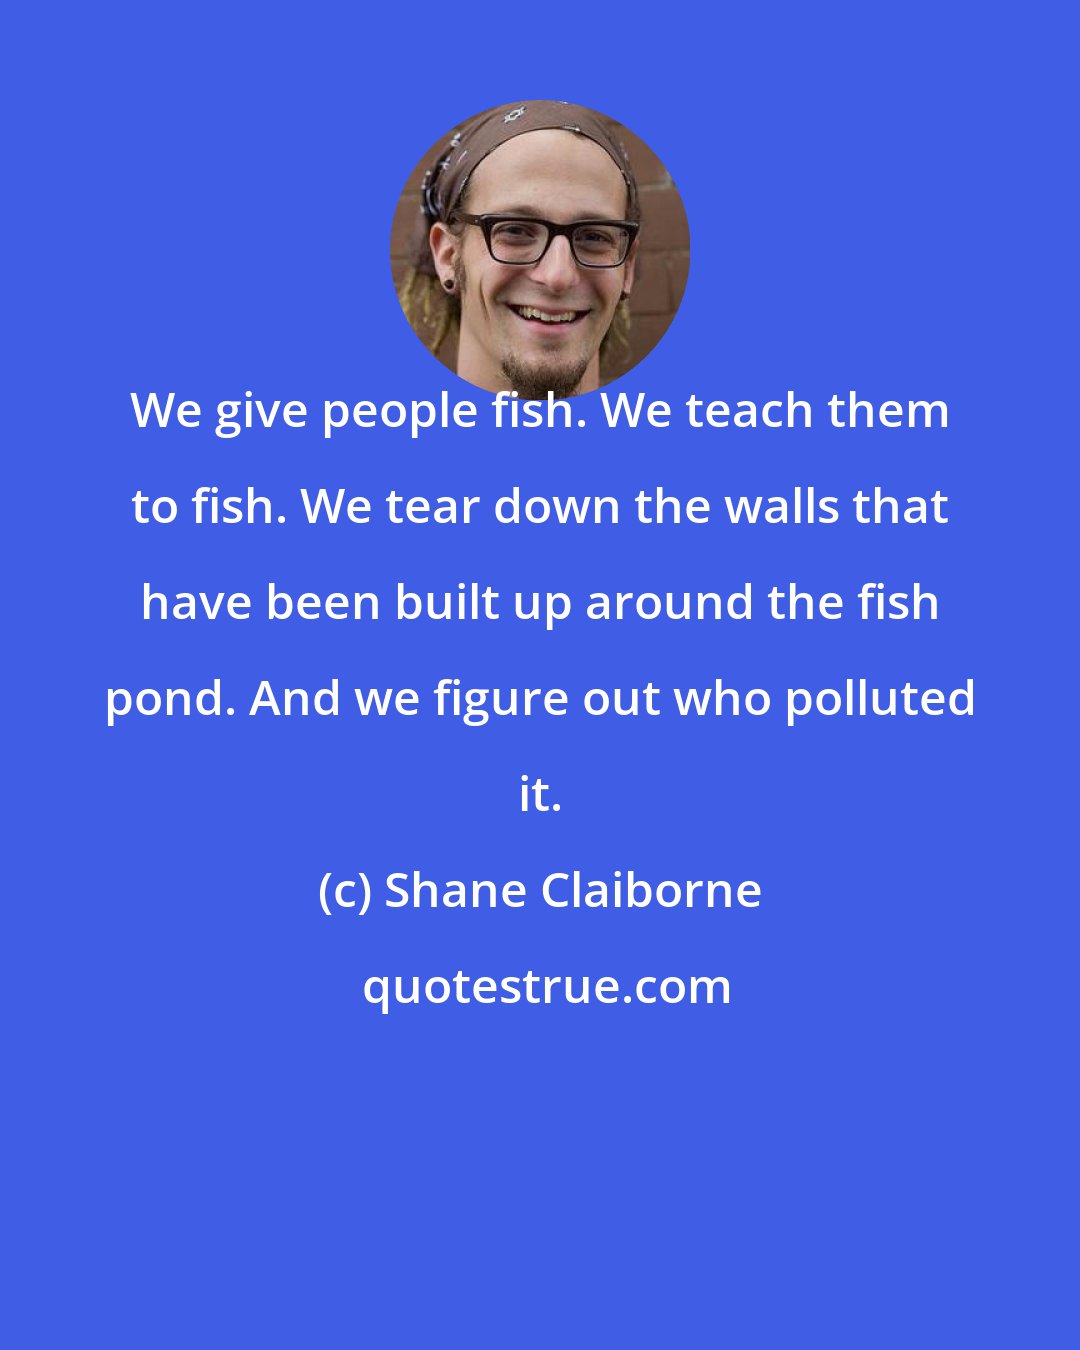 Shane Claiborne: We give people fish. We teach them to fish. We tear down the walls that have been built up around the fish pond. And we figure out who polluted it.